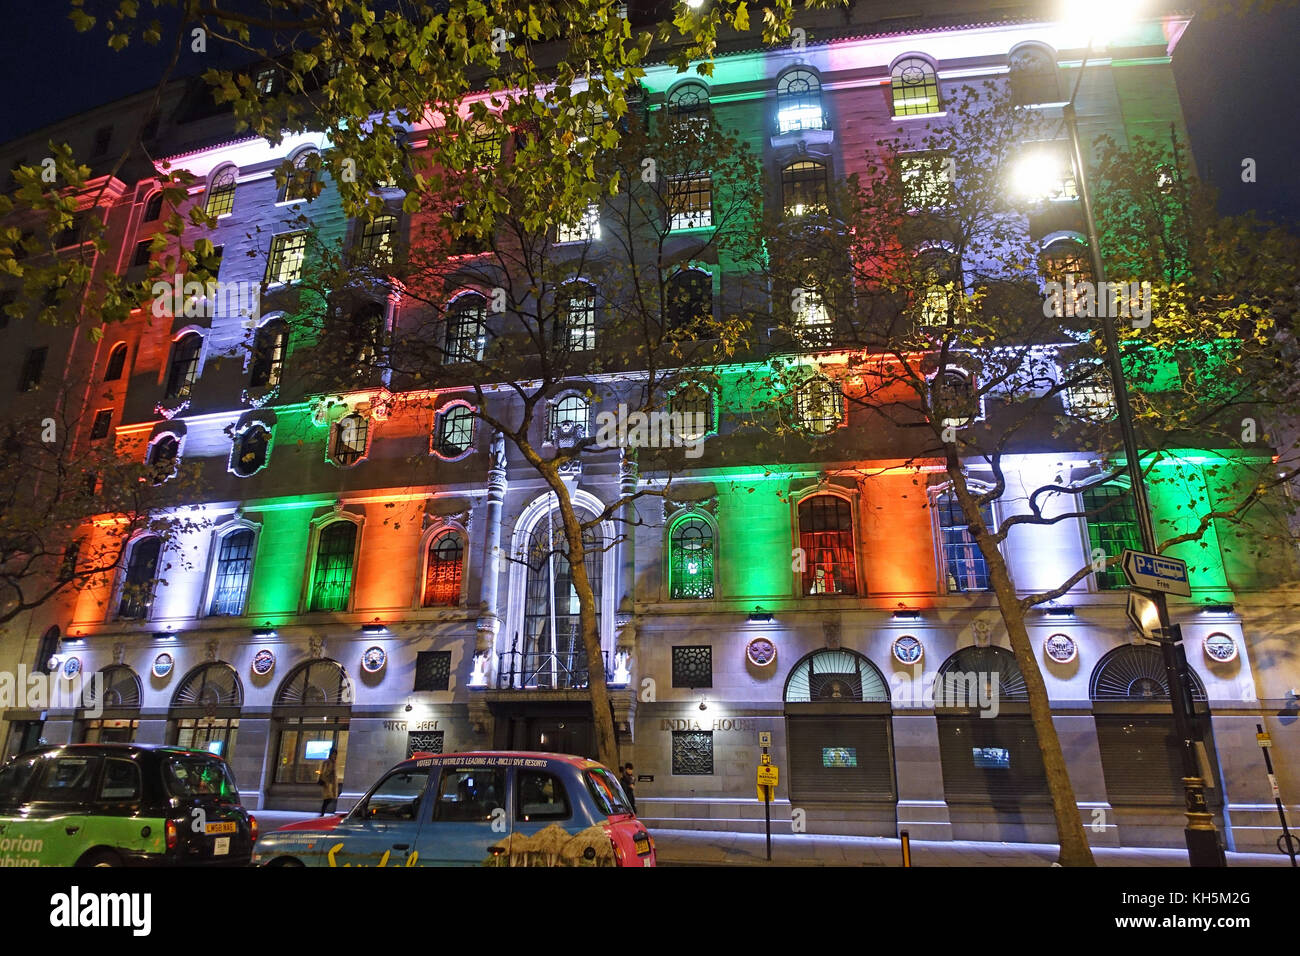 View of India House on the Aldwych in London brightly illuminated with coloured lights at night Stock Photo